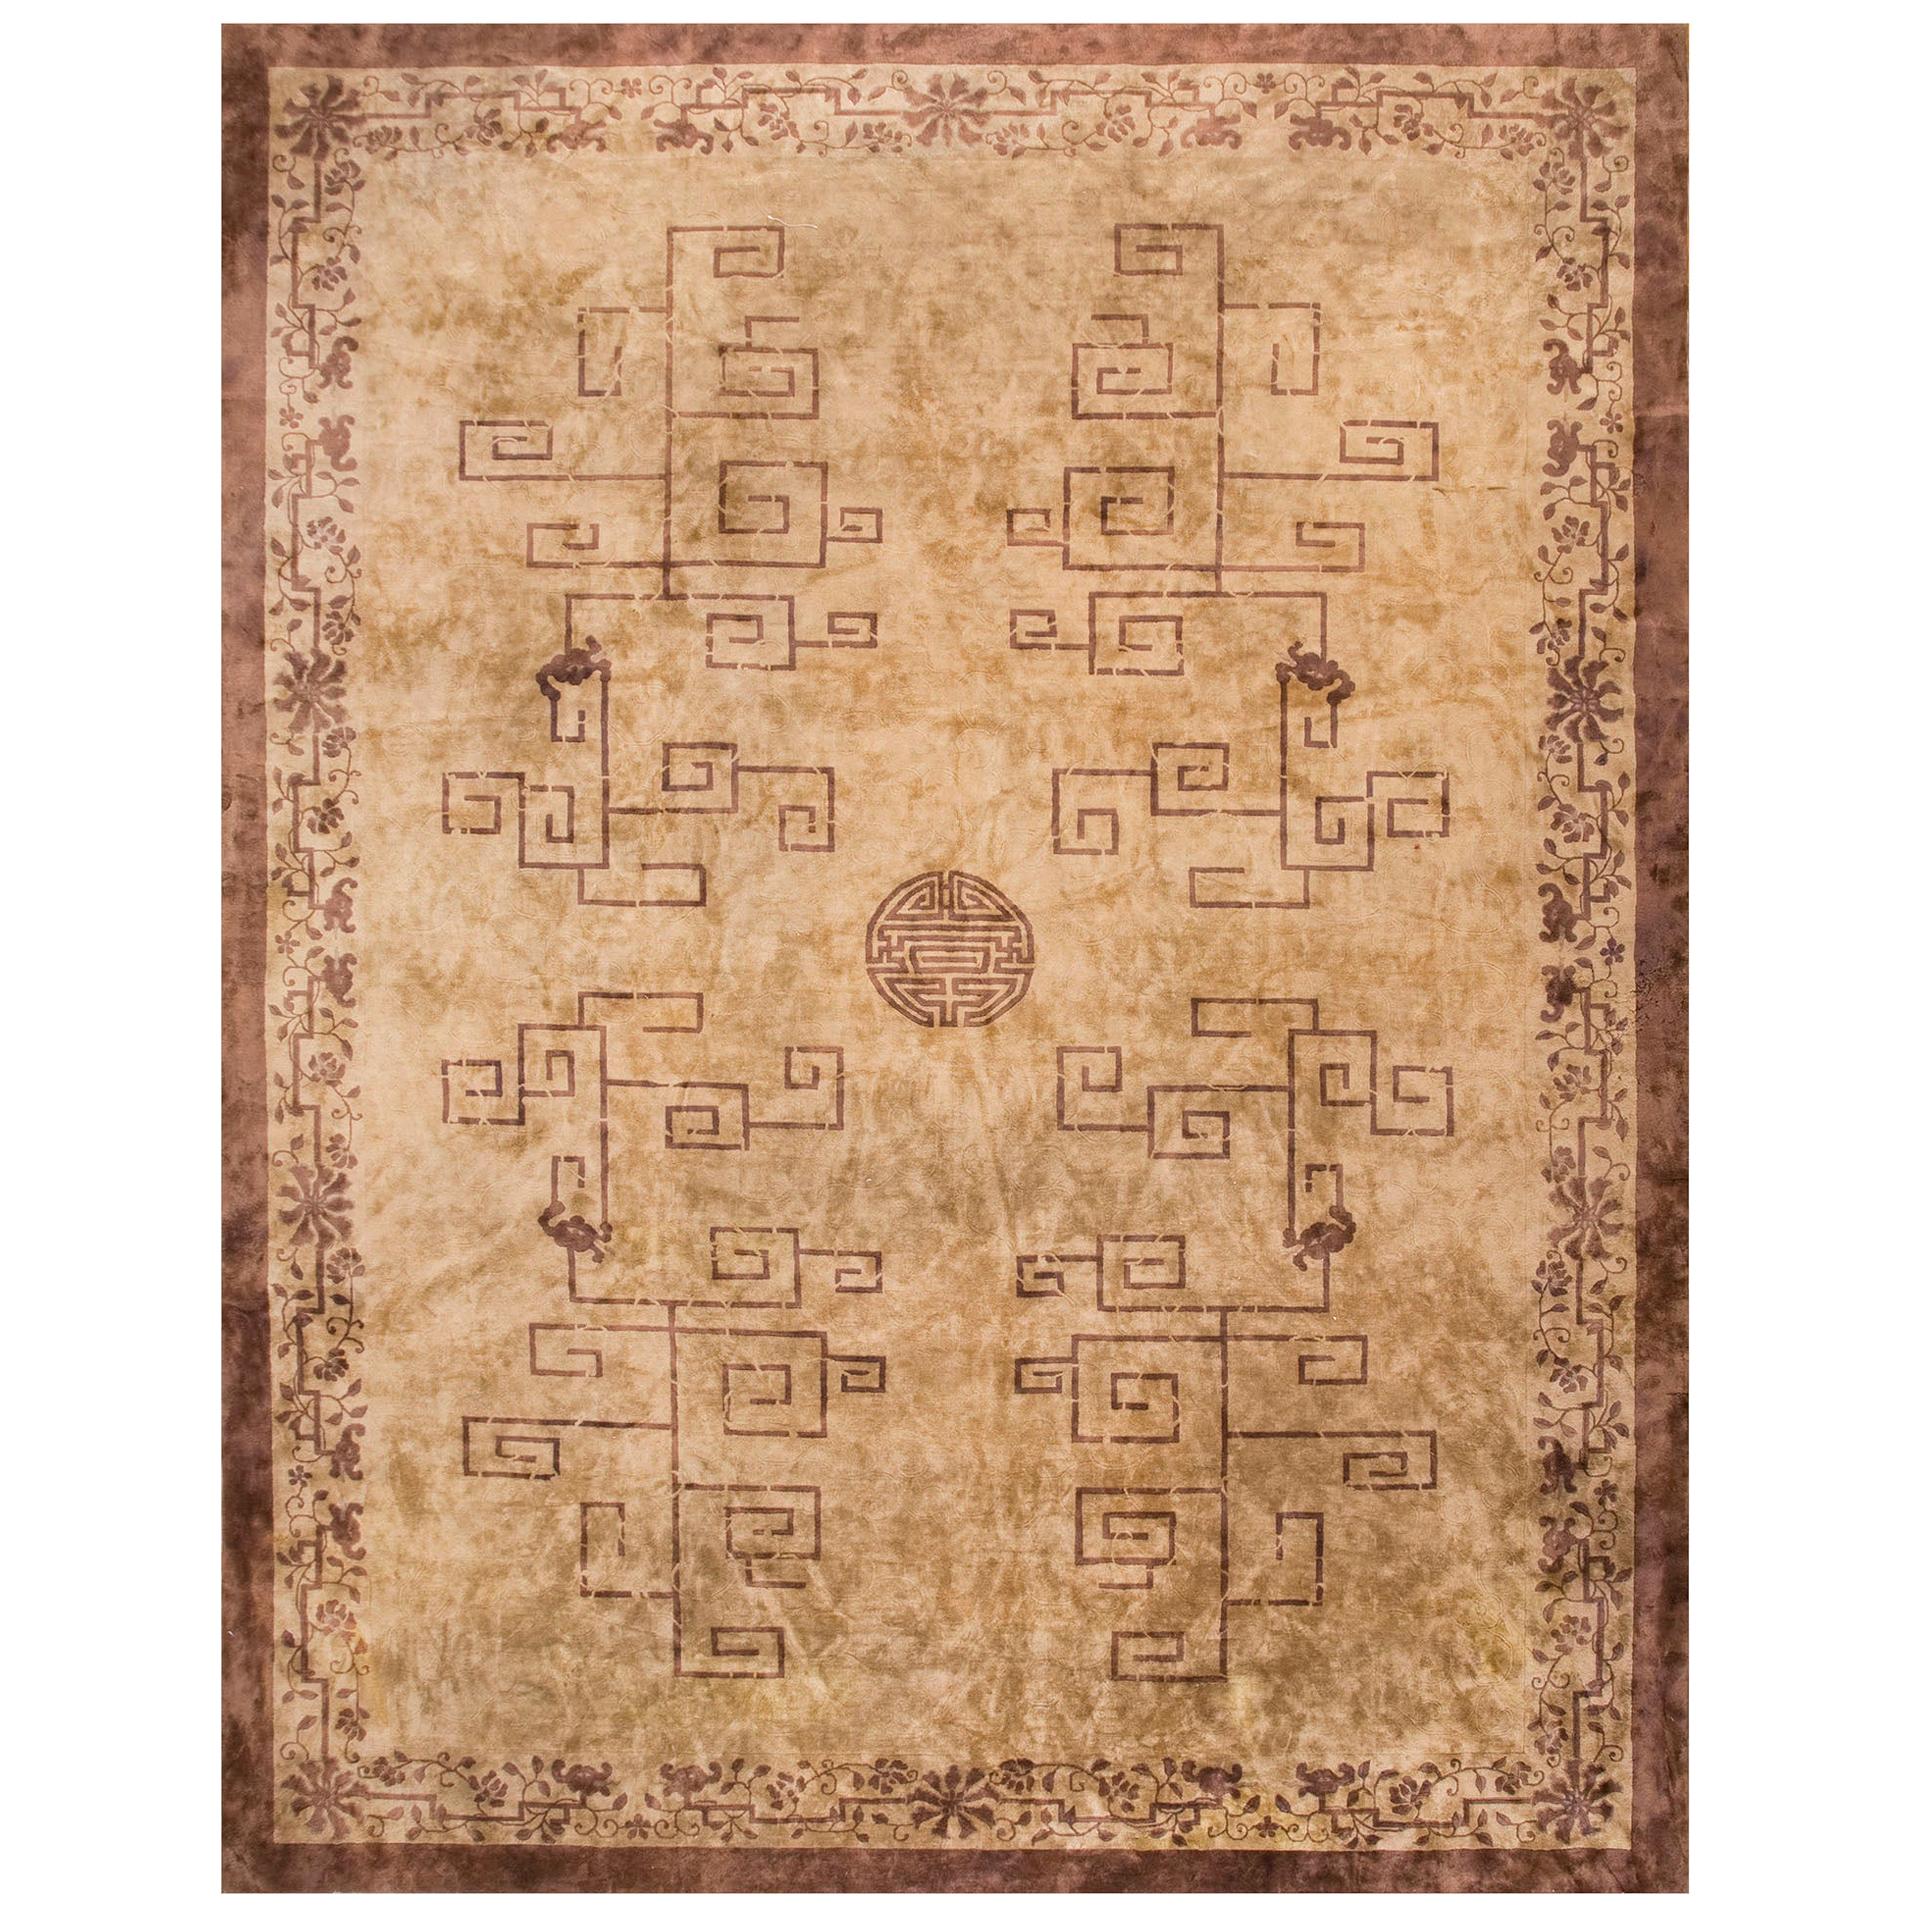 Early 20th Century Chinese Peking Carpet ( 12' x 15'8" - 366 x 478 ) For Sale